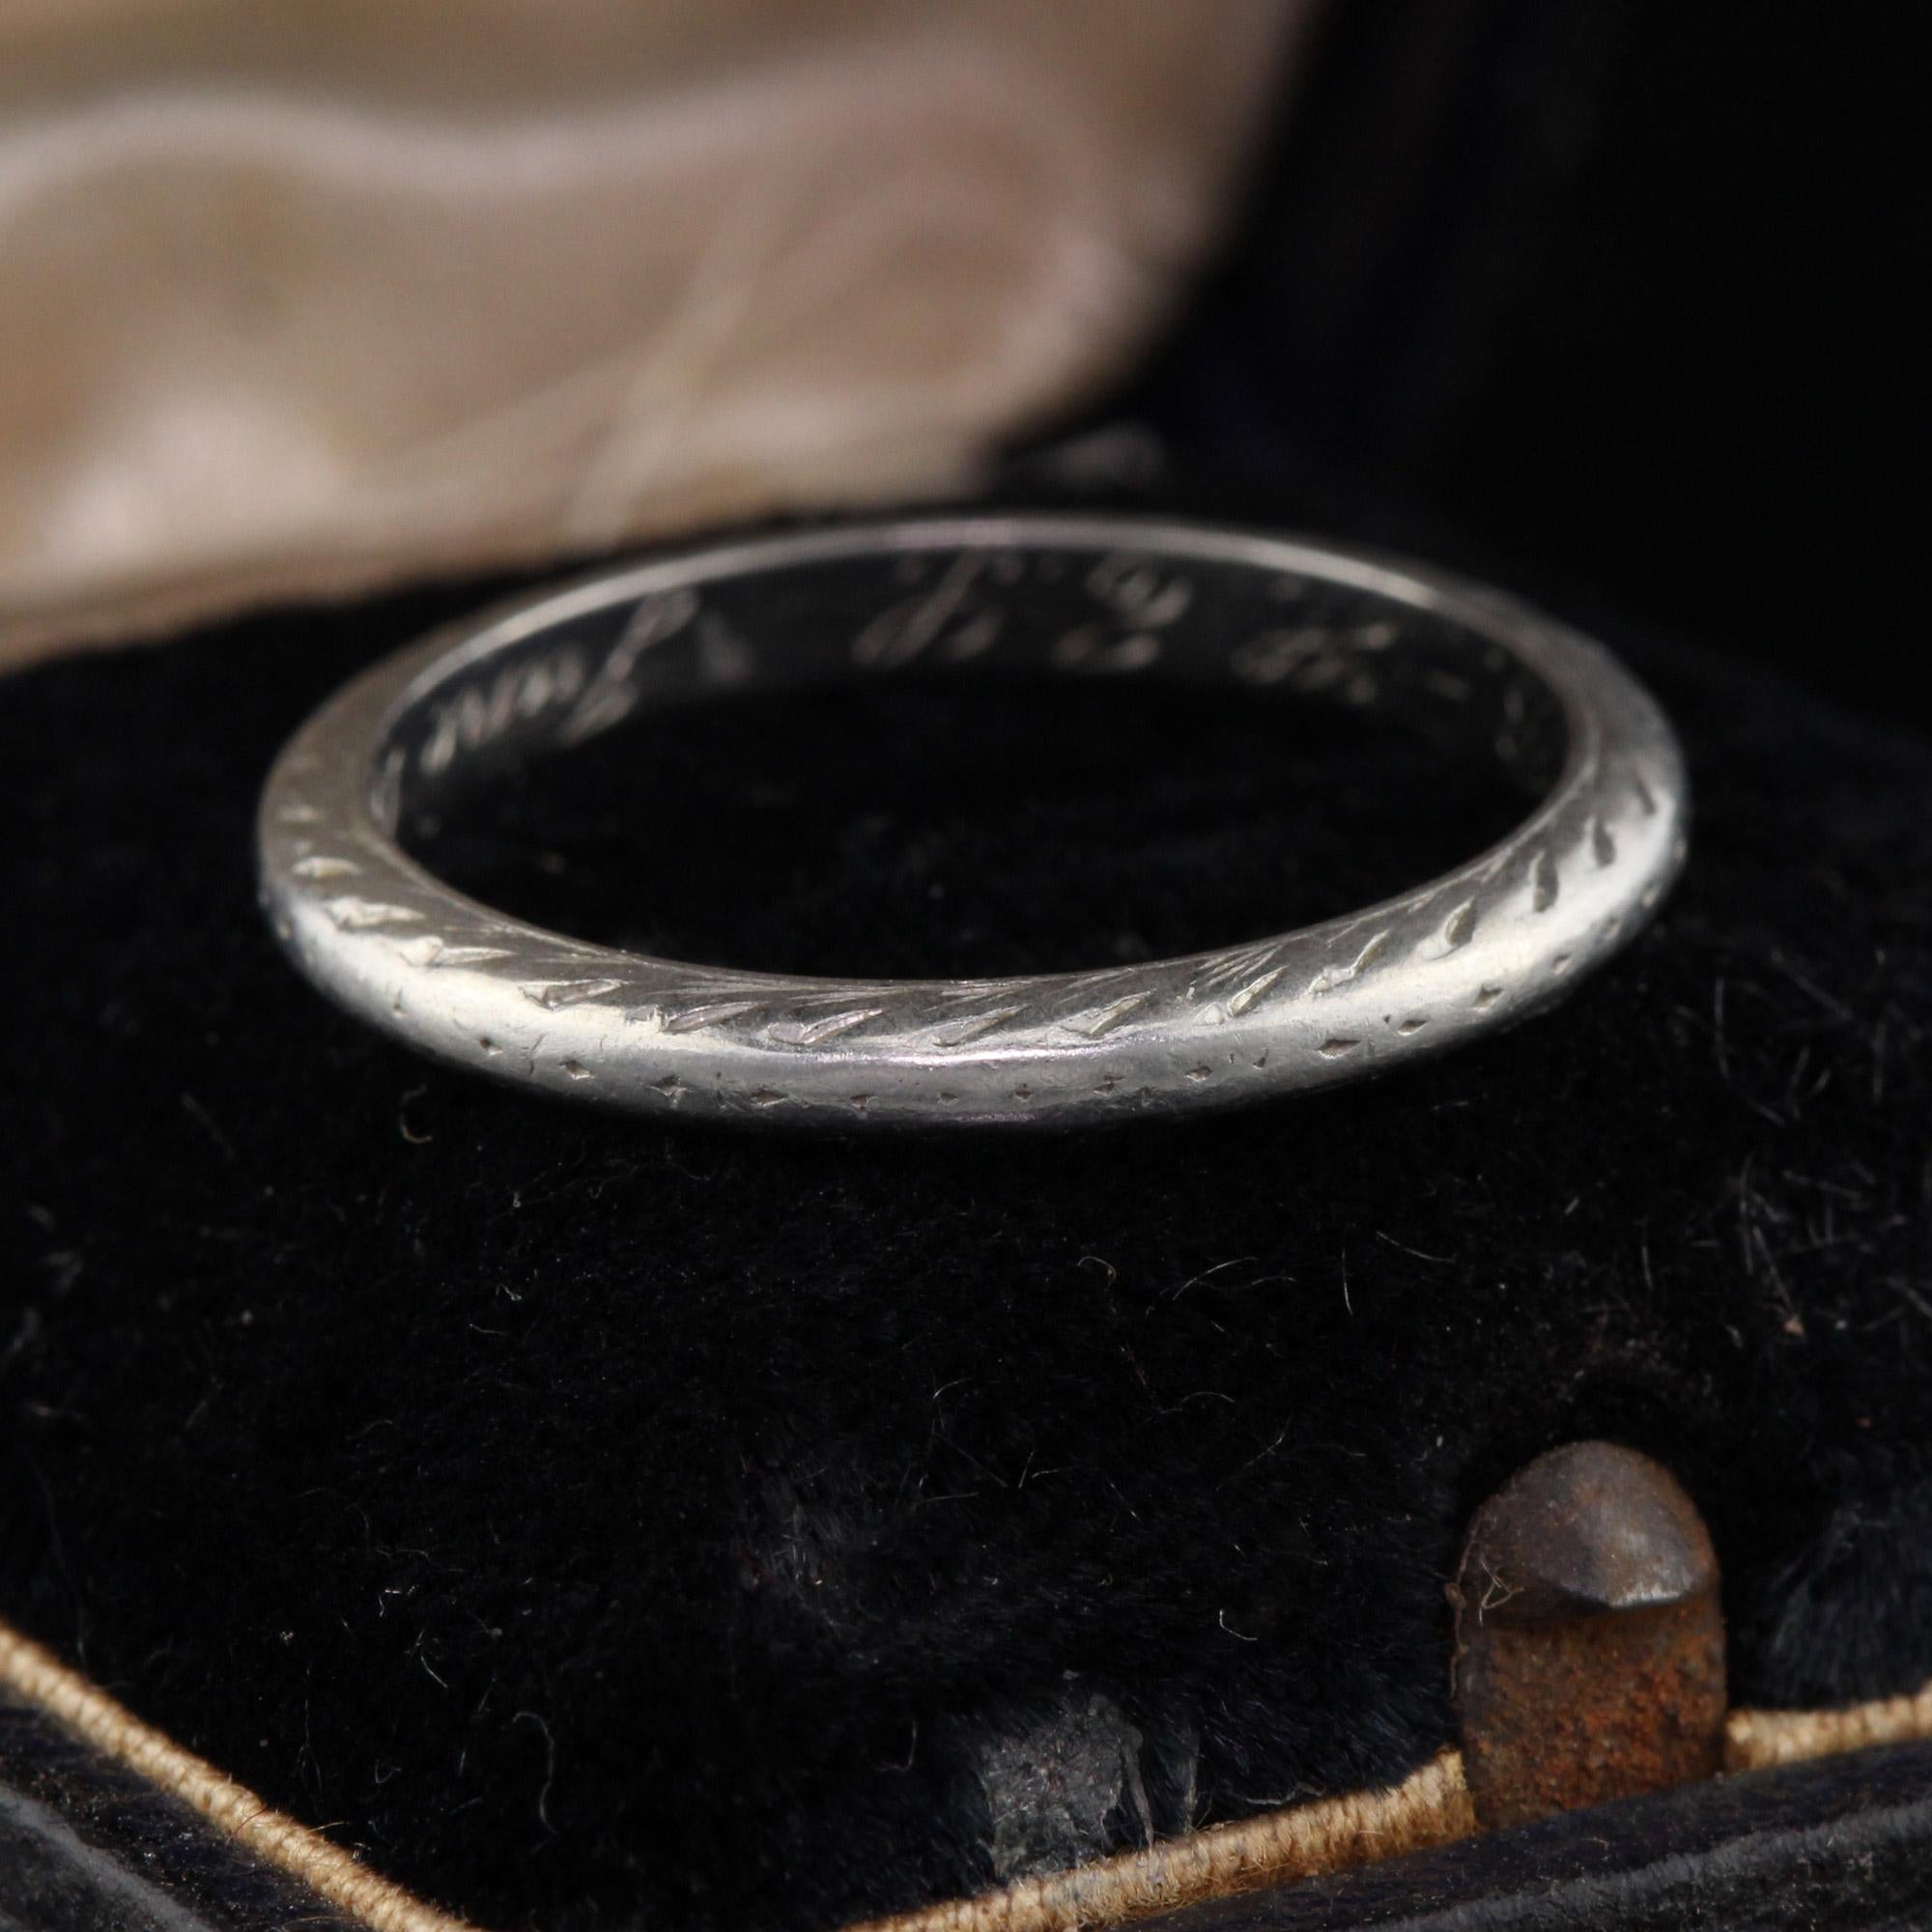 Vintage Art Deco Platinum Hand Engraved Dated Wedding Band - Circa 1924!

#R0070

Metal: Platinum

Weight: 2.8 Grams

Ring Size: 5

Unfortunately this ring cannot be sized.

Measurements: 2.15 mm wide

Engraving inside shank: 'H.E.B - H.E.P June